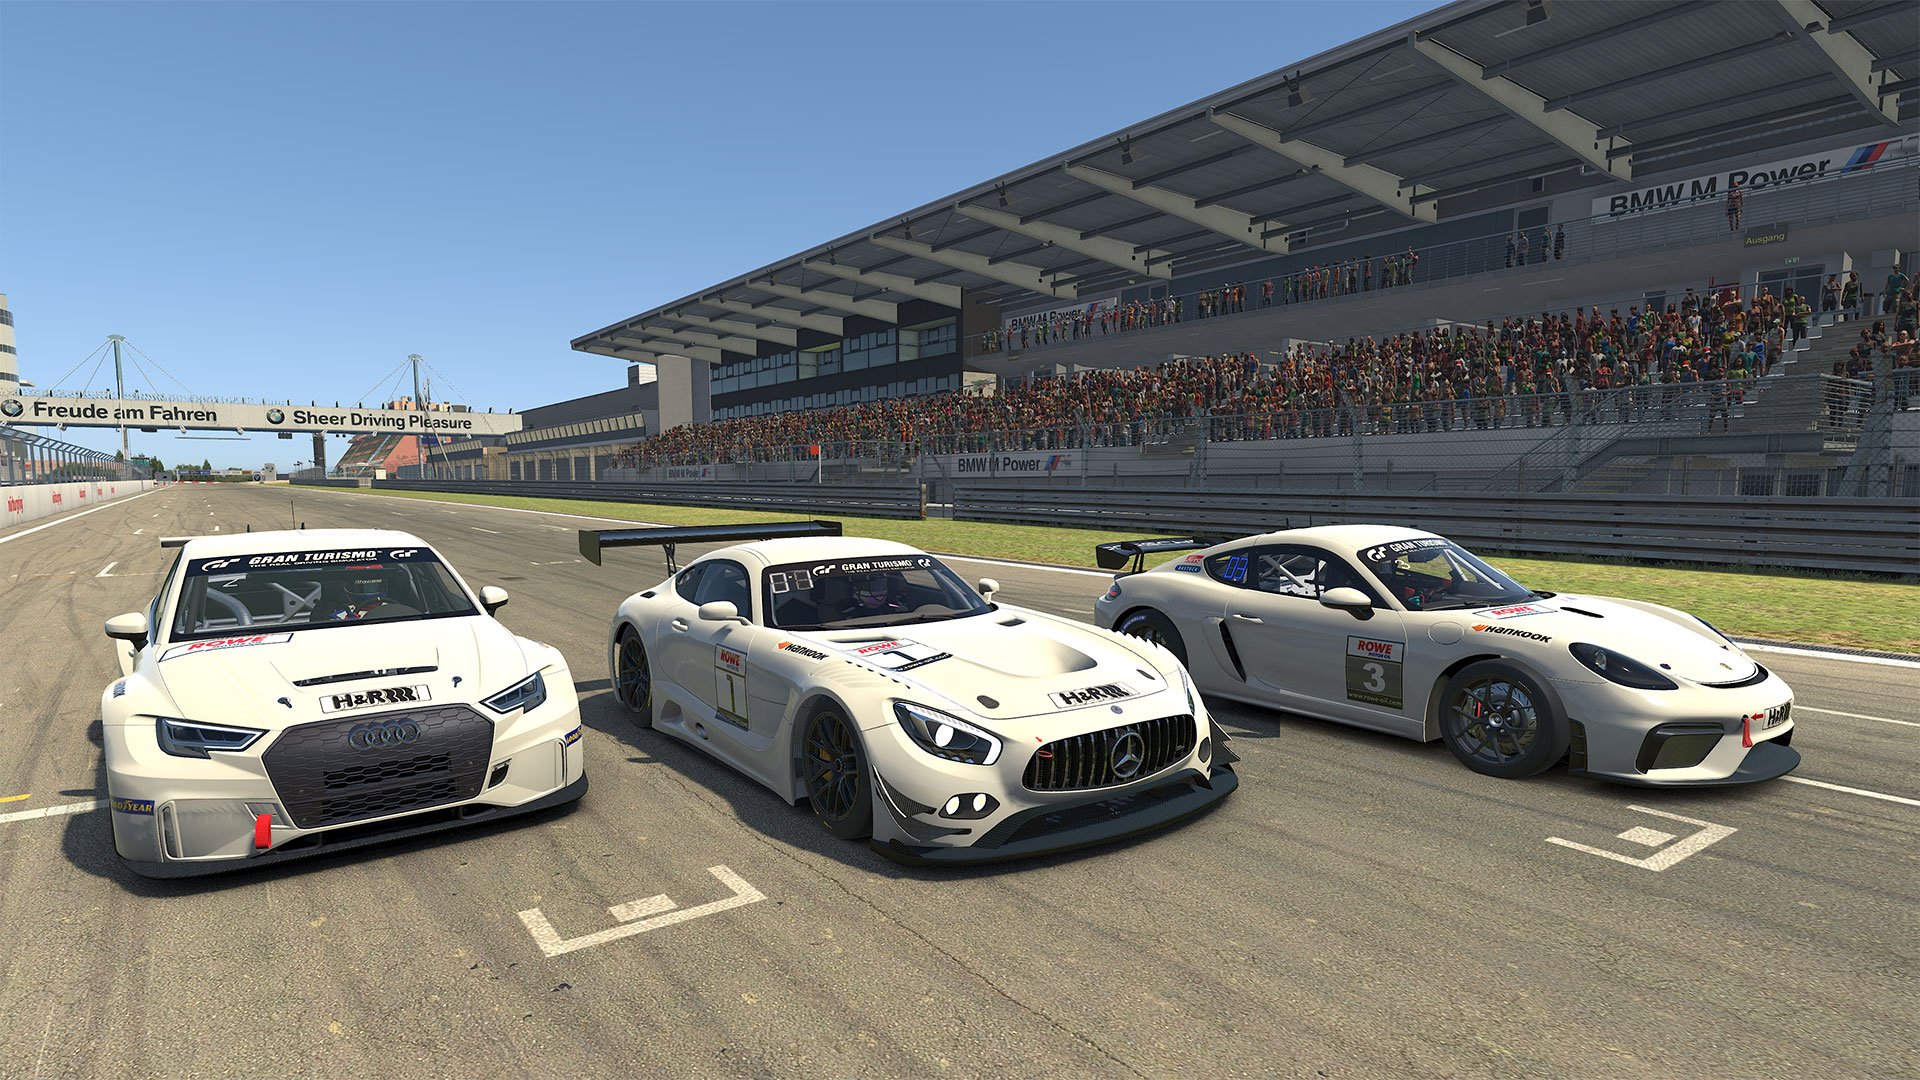 More information about "iRacing: parte la stagione virtuale Nürburgring Endurance Series [gara 21 Marzo ore 13,00]"